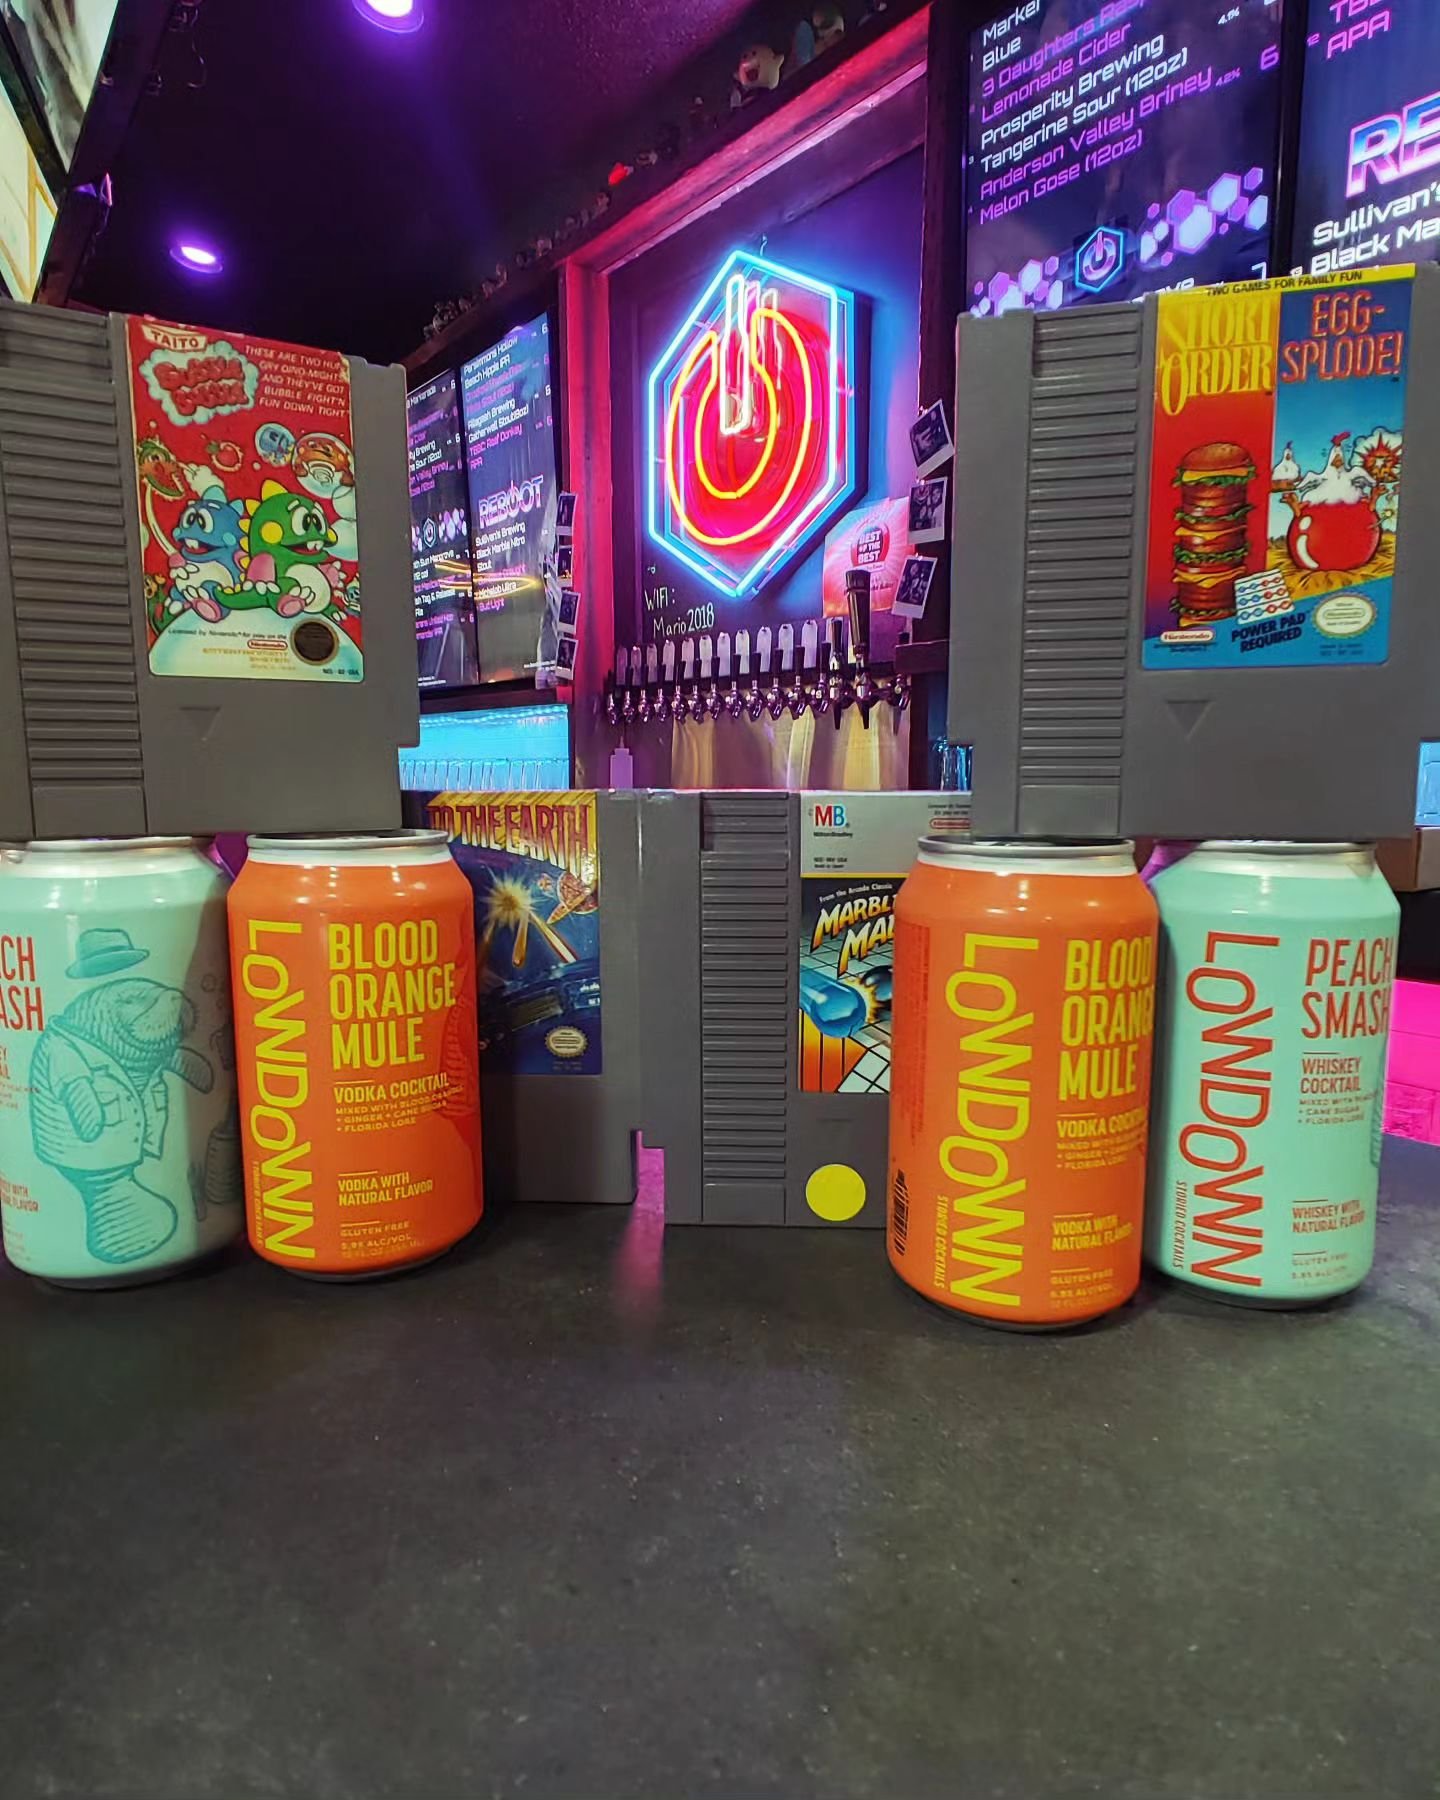 New @drinklowdown at Reboot Dunedin for your drinking pleasure🤙🎮🕹️🍻

Peach Smash: Whiskey cocktail mixed with peaches cane sugar. Gluten free

Blood Orange Mule: vodka cocktail mixed with butt oranges, ginger and cane sugar. Gluten free

@visitdu